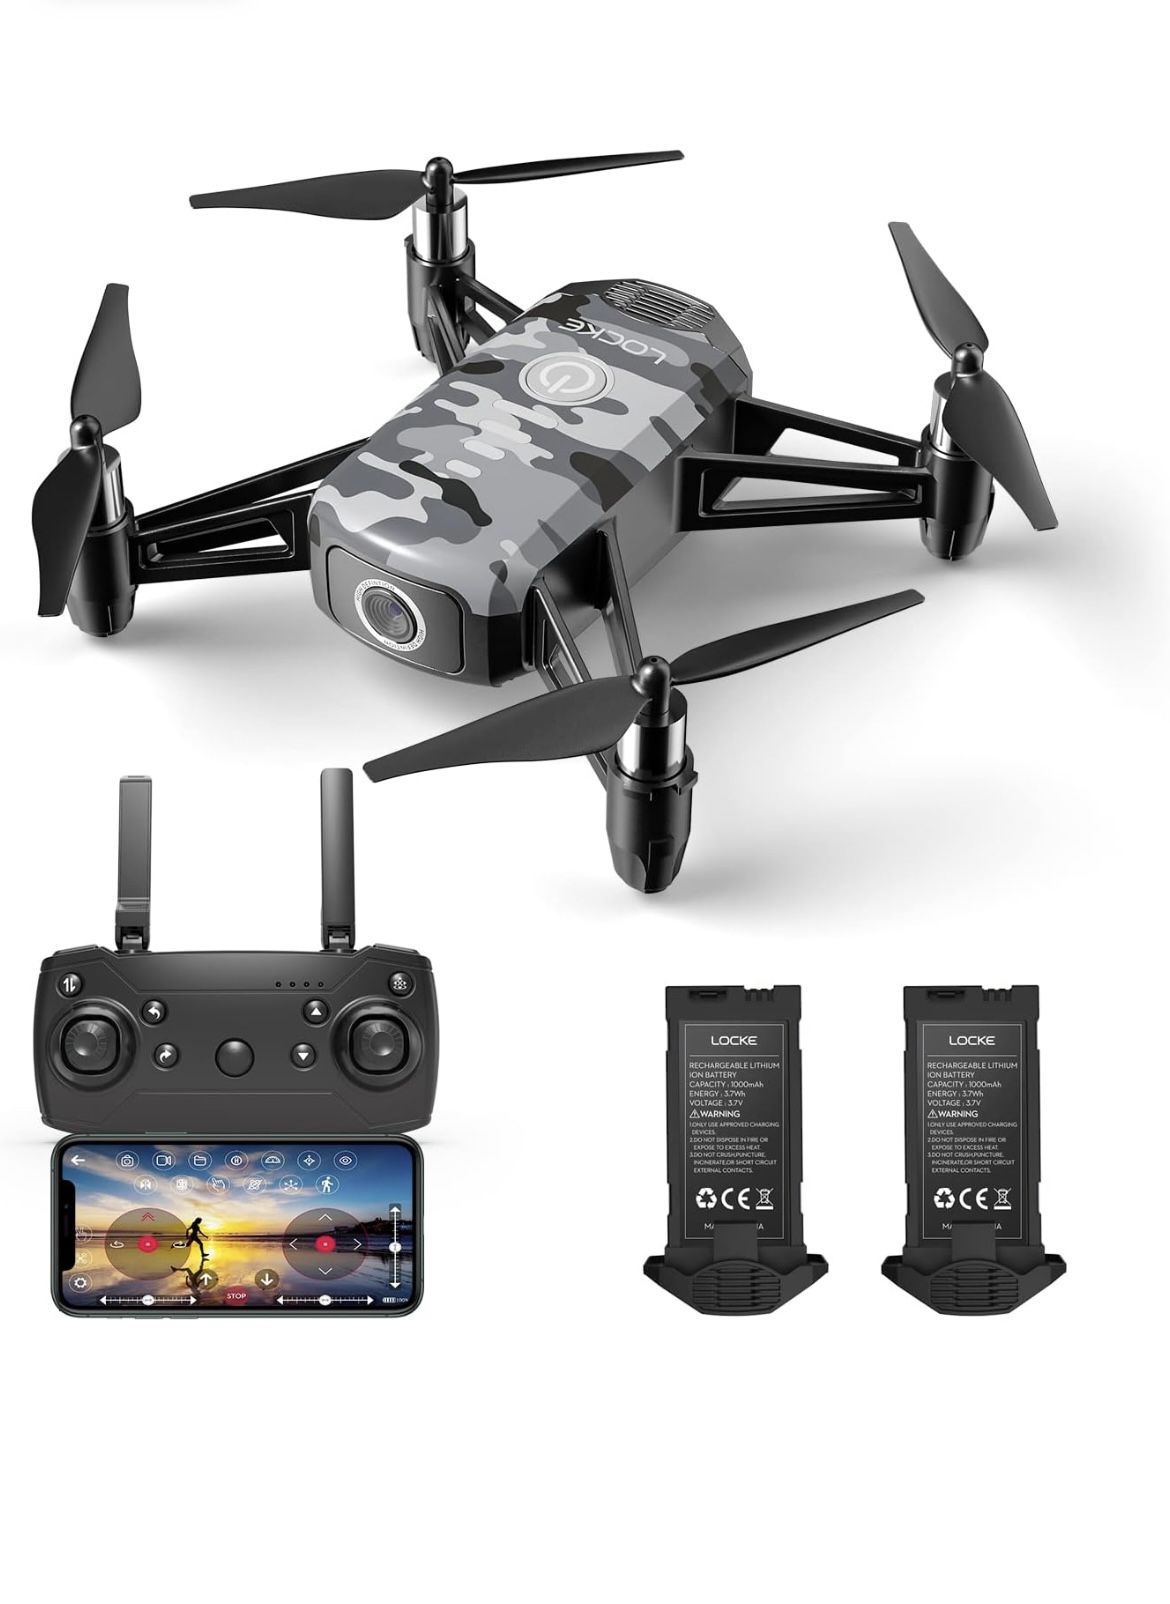 Brand New HR Drone For Kids With 1080p HD FPV Camera,Mini Quadcopter For Beginners With Altitude Hol